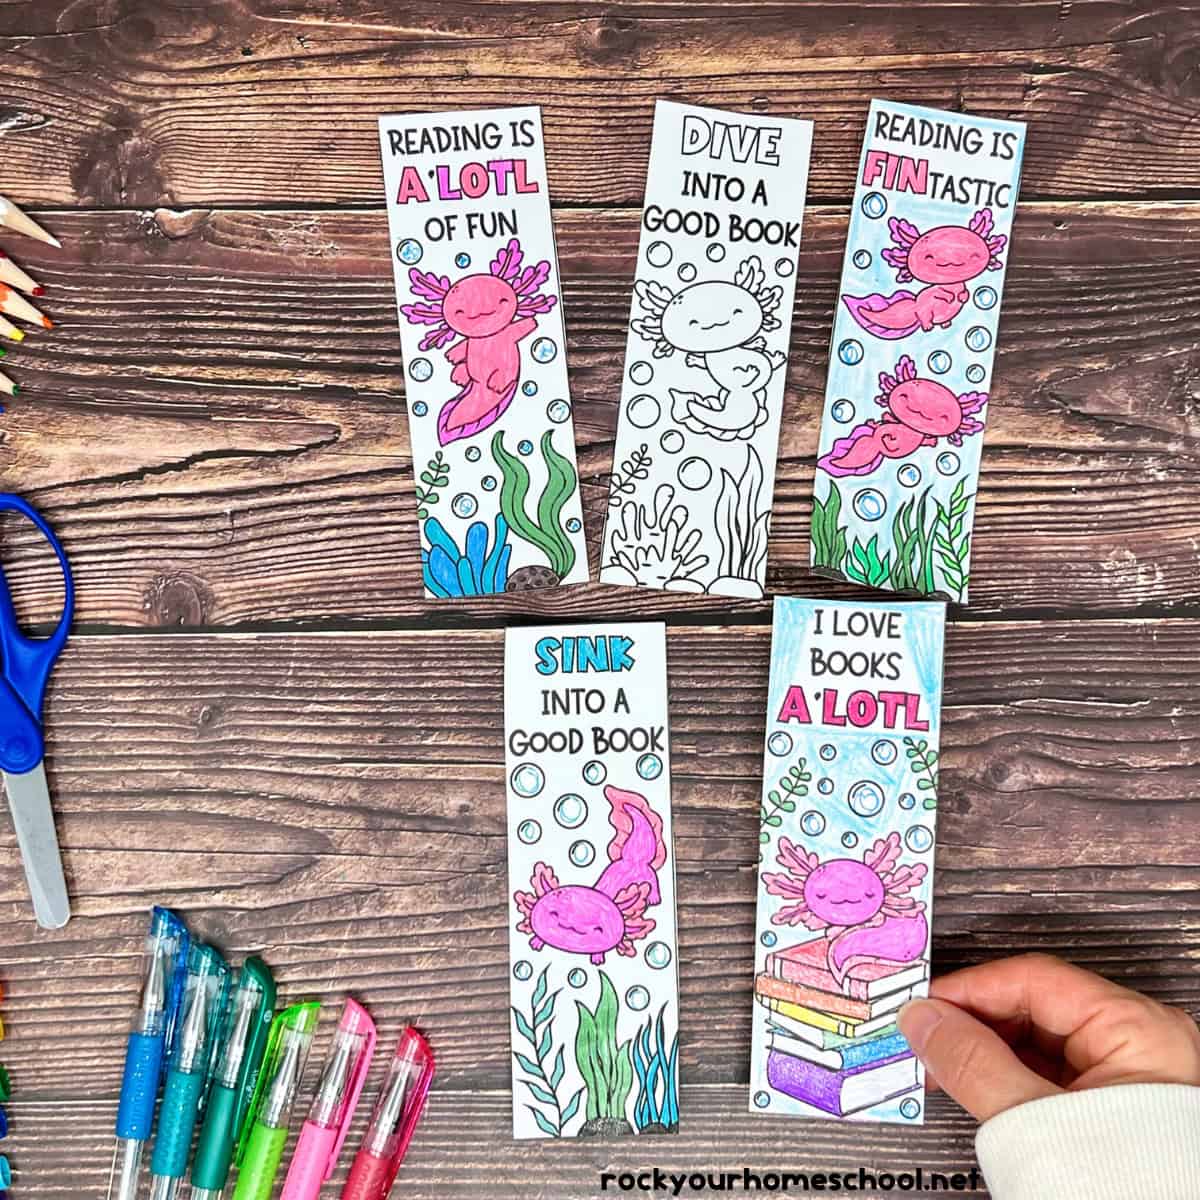 Axolotl Bookmarks To Color: Awesome Ideas For Reading Fun (Free)